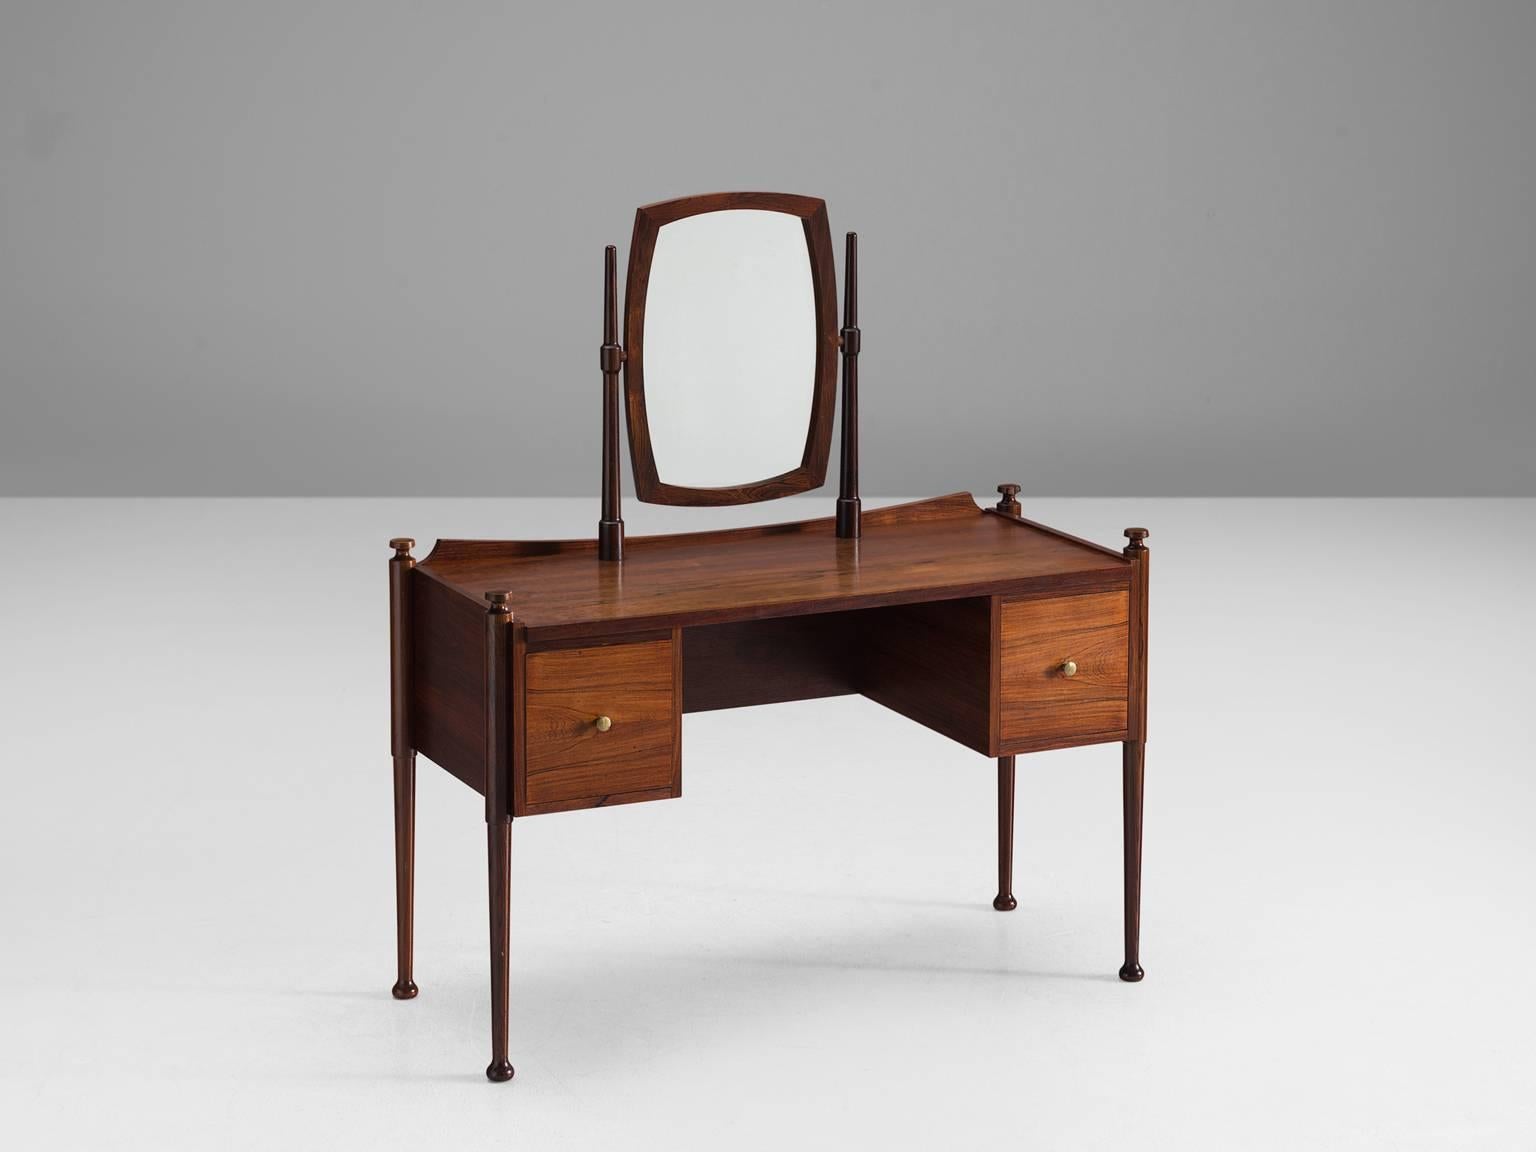 Dressing table, rosewood, brass, Denmark, 1950s.

This delicate little vanity table shows many refined details such as the finished back. The drawers on the front, each featuring a small brass knob, have a book matched rosewood front. The four